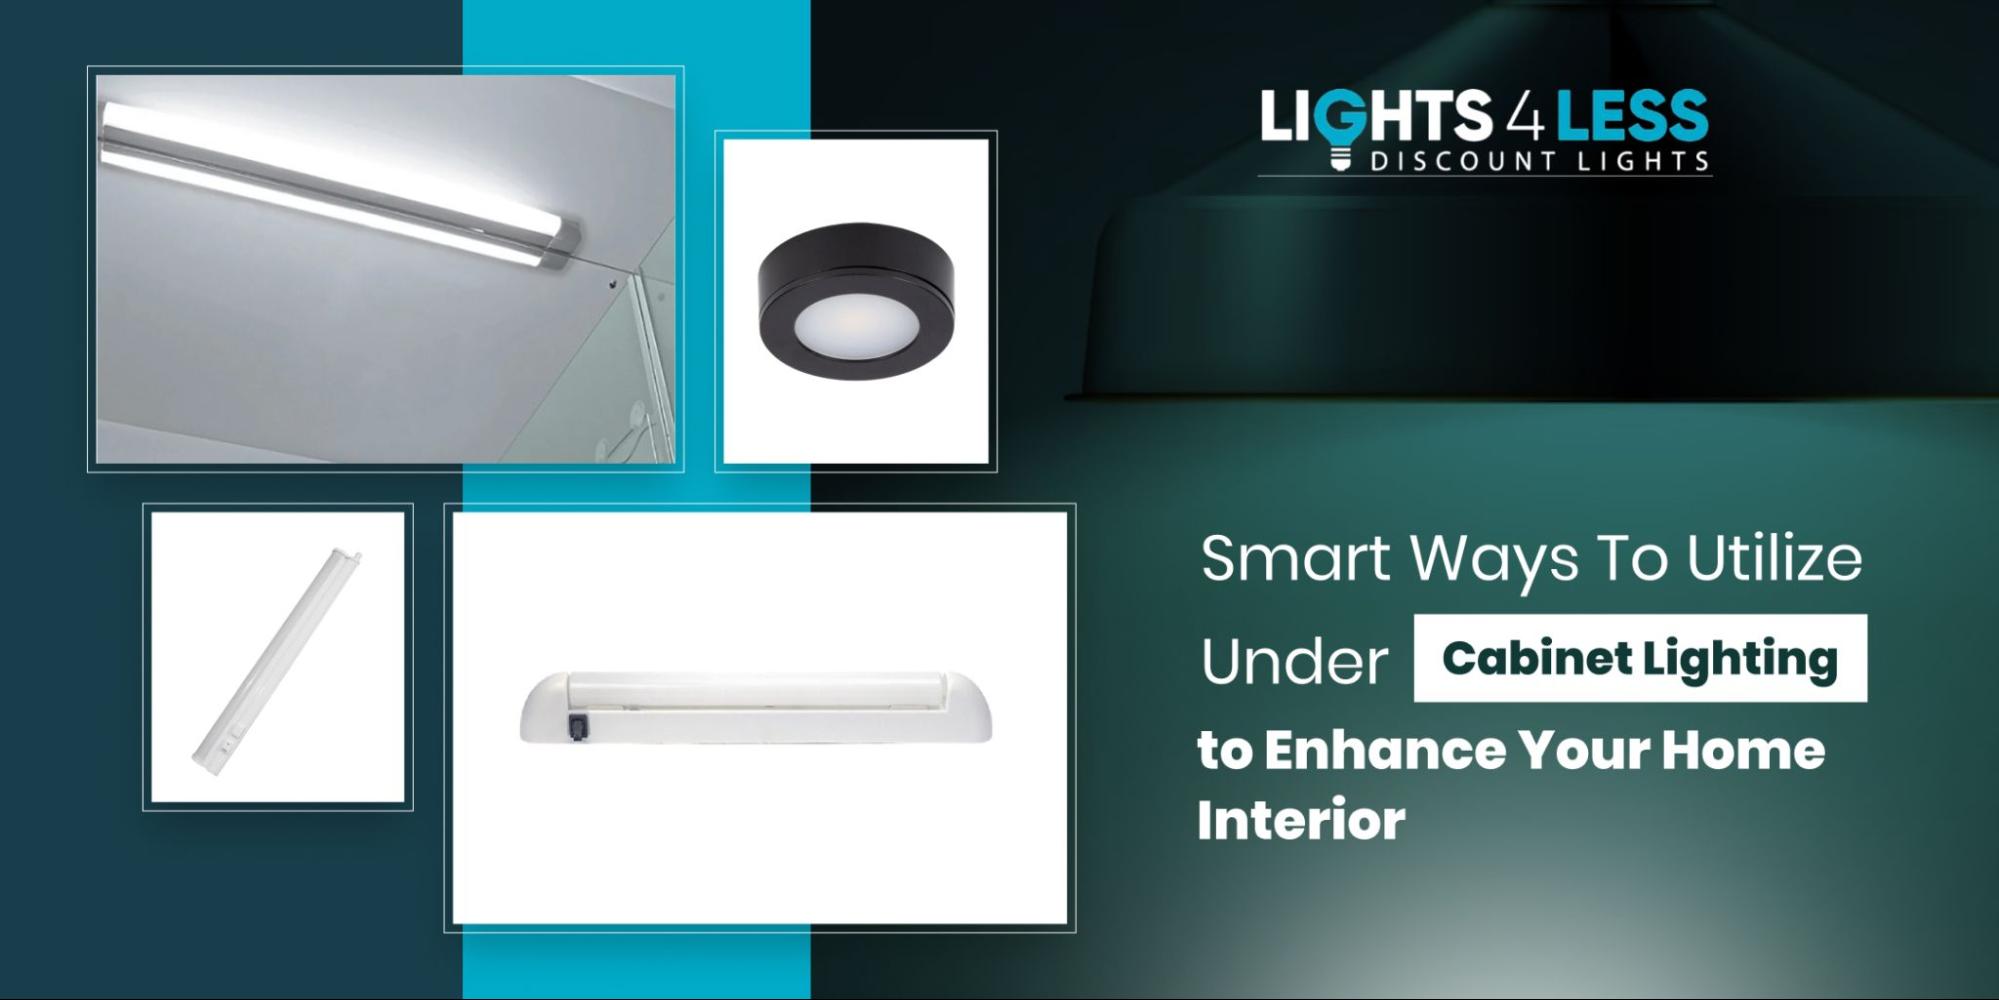 Smart Ways to Use Under Cabinet Lights to Enhance Home Interior